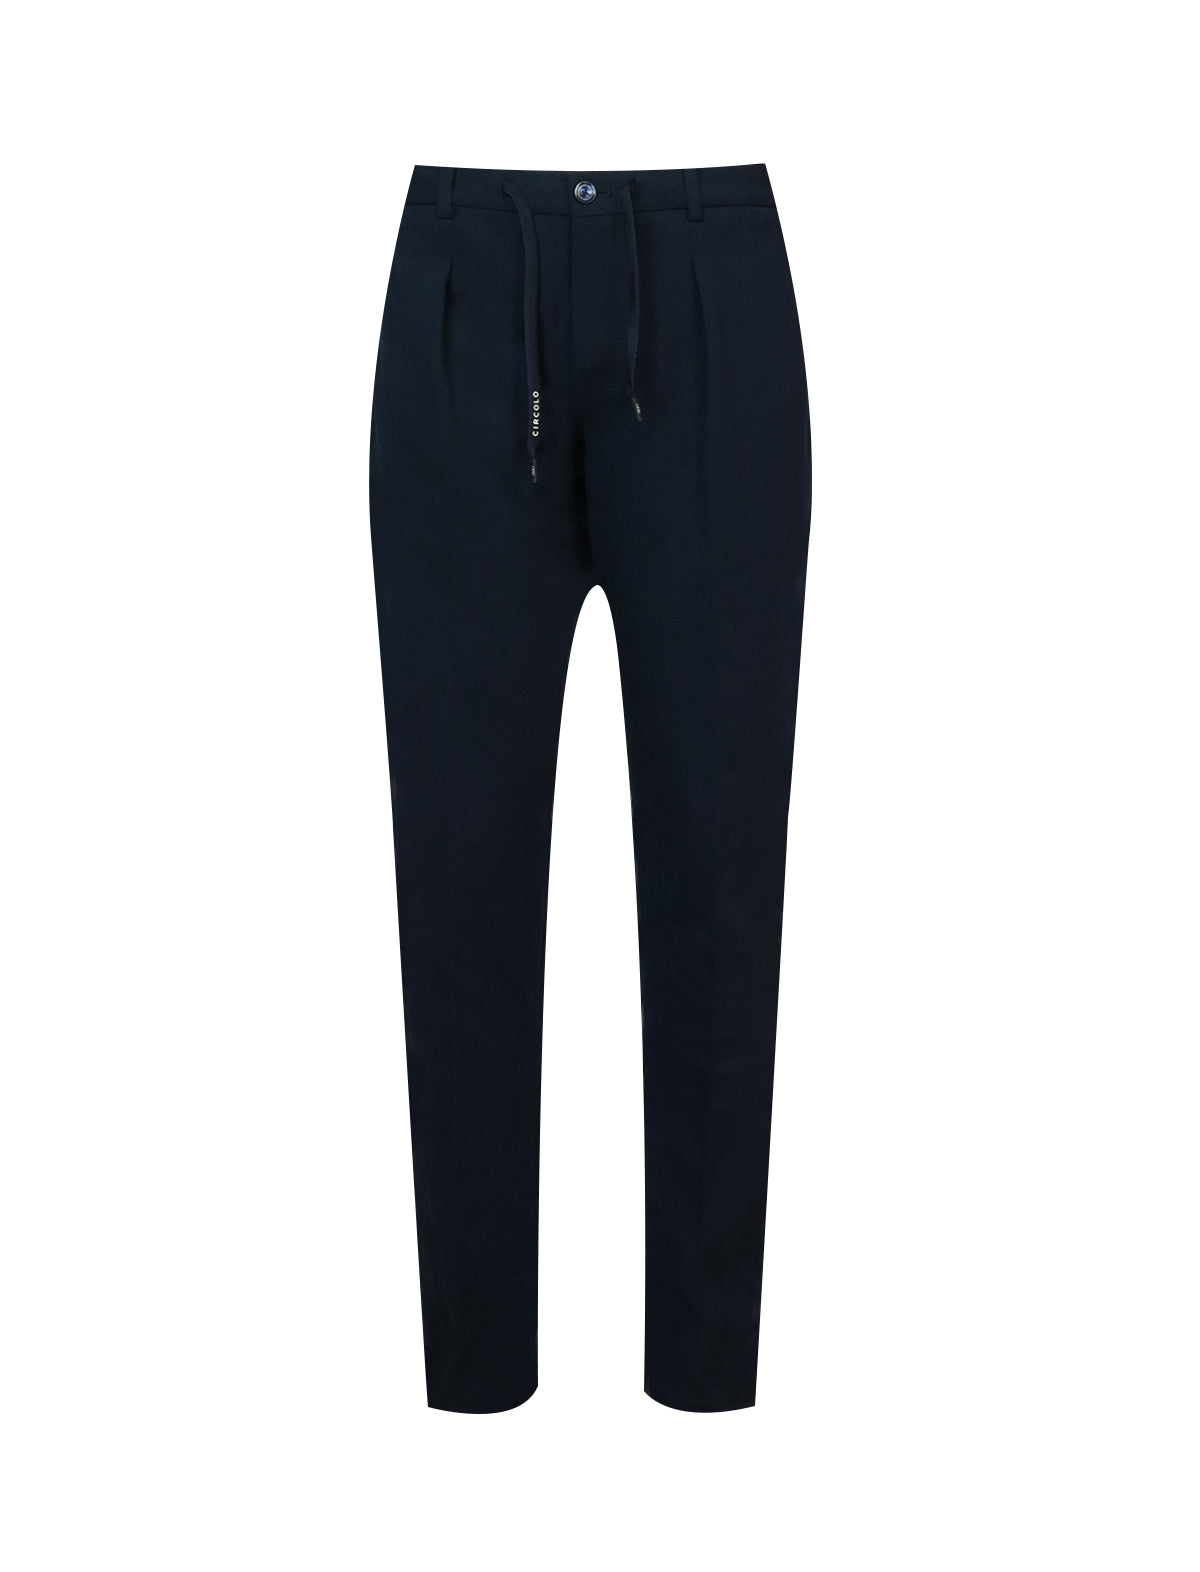 CIRCOLO 1901 Tailored Pants in Blue Navy